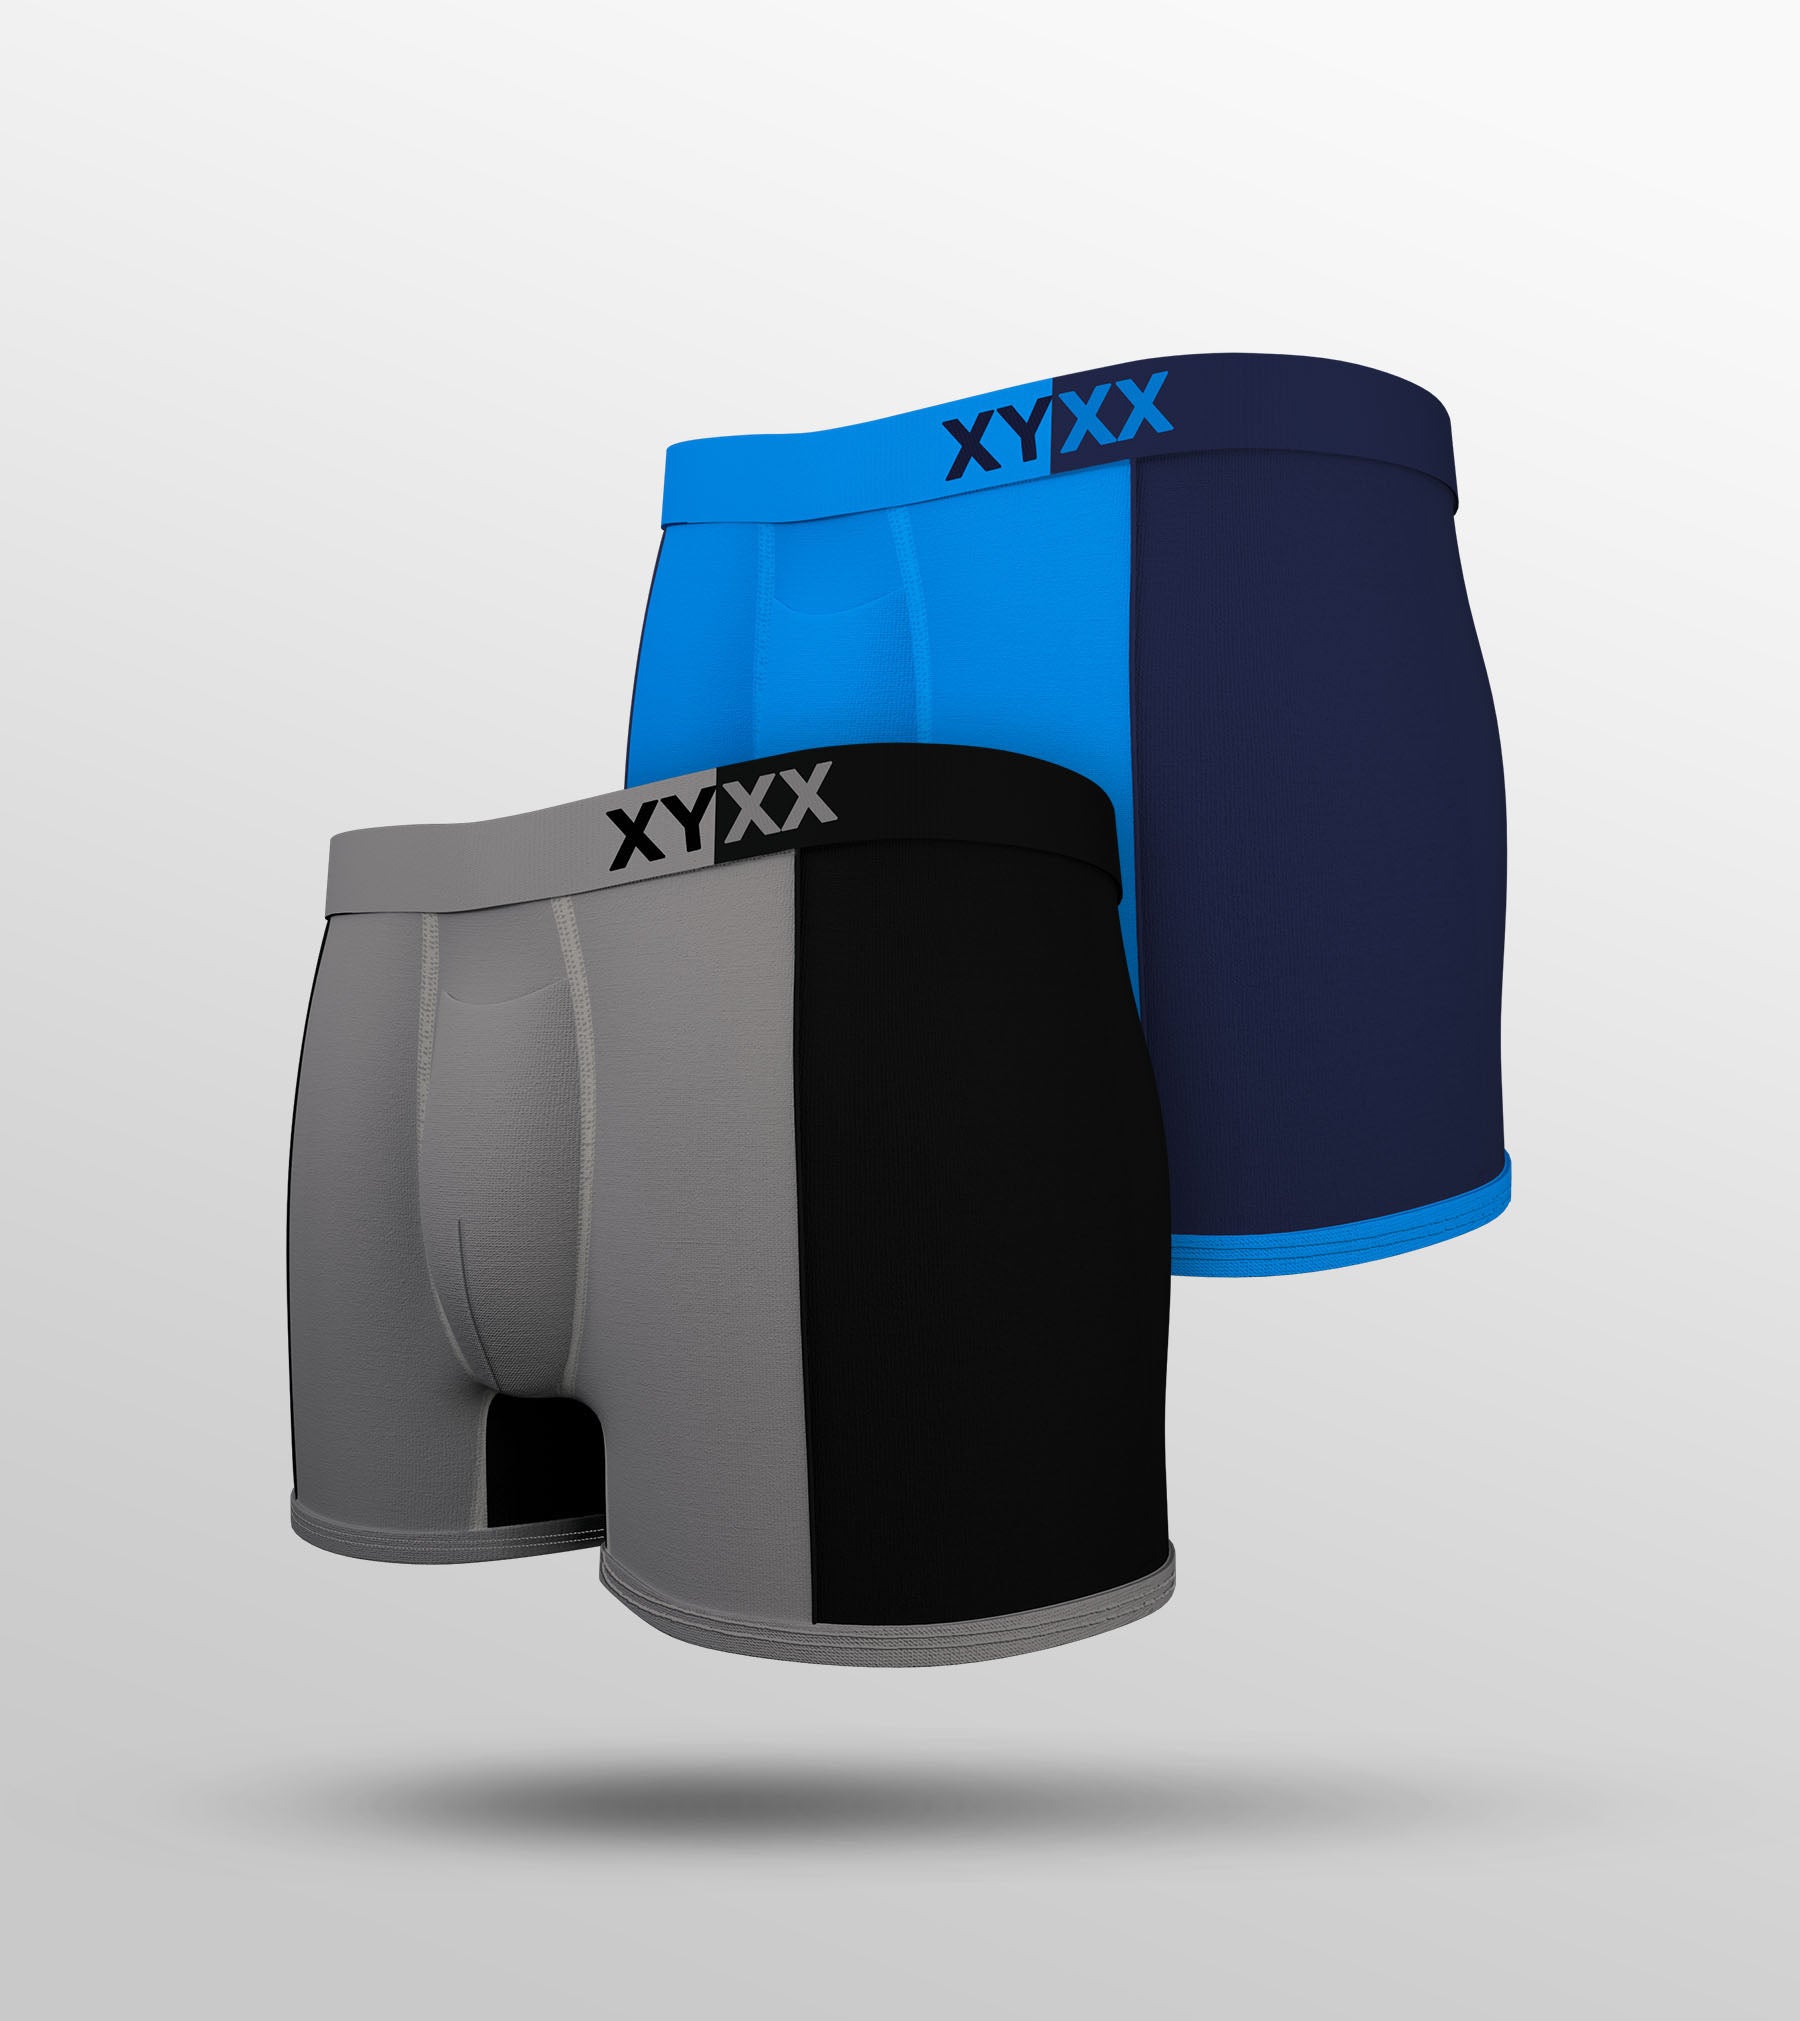 Dualist Modal Trunks For Men Pack of 2 (Grey, Blue) -  XYXX Mens Apparels